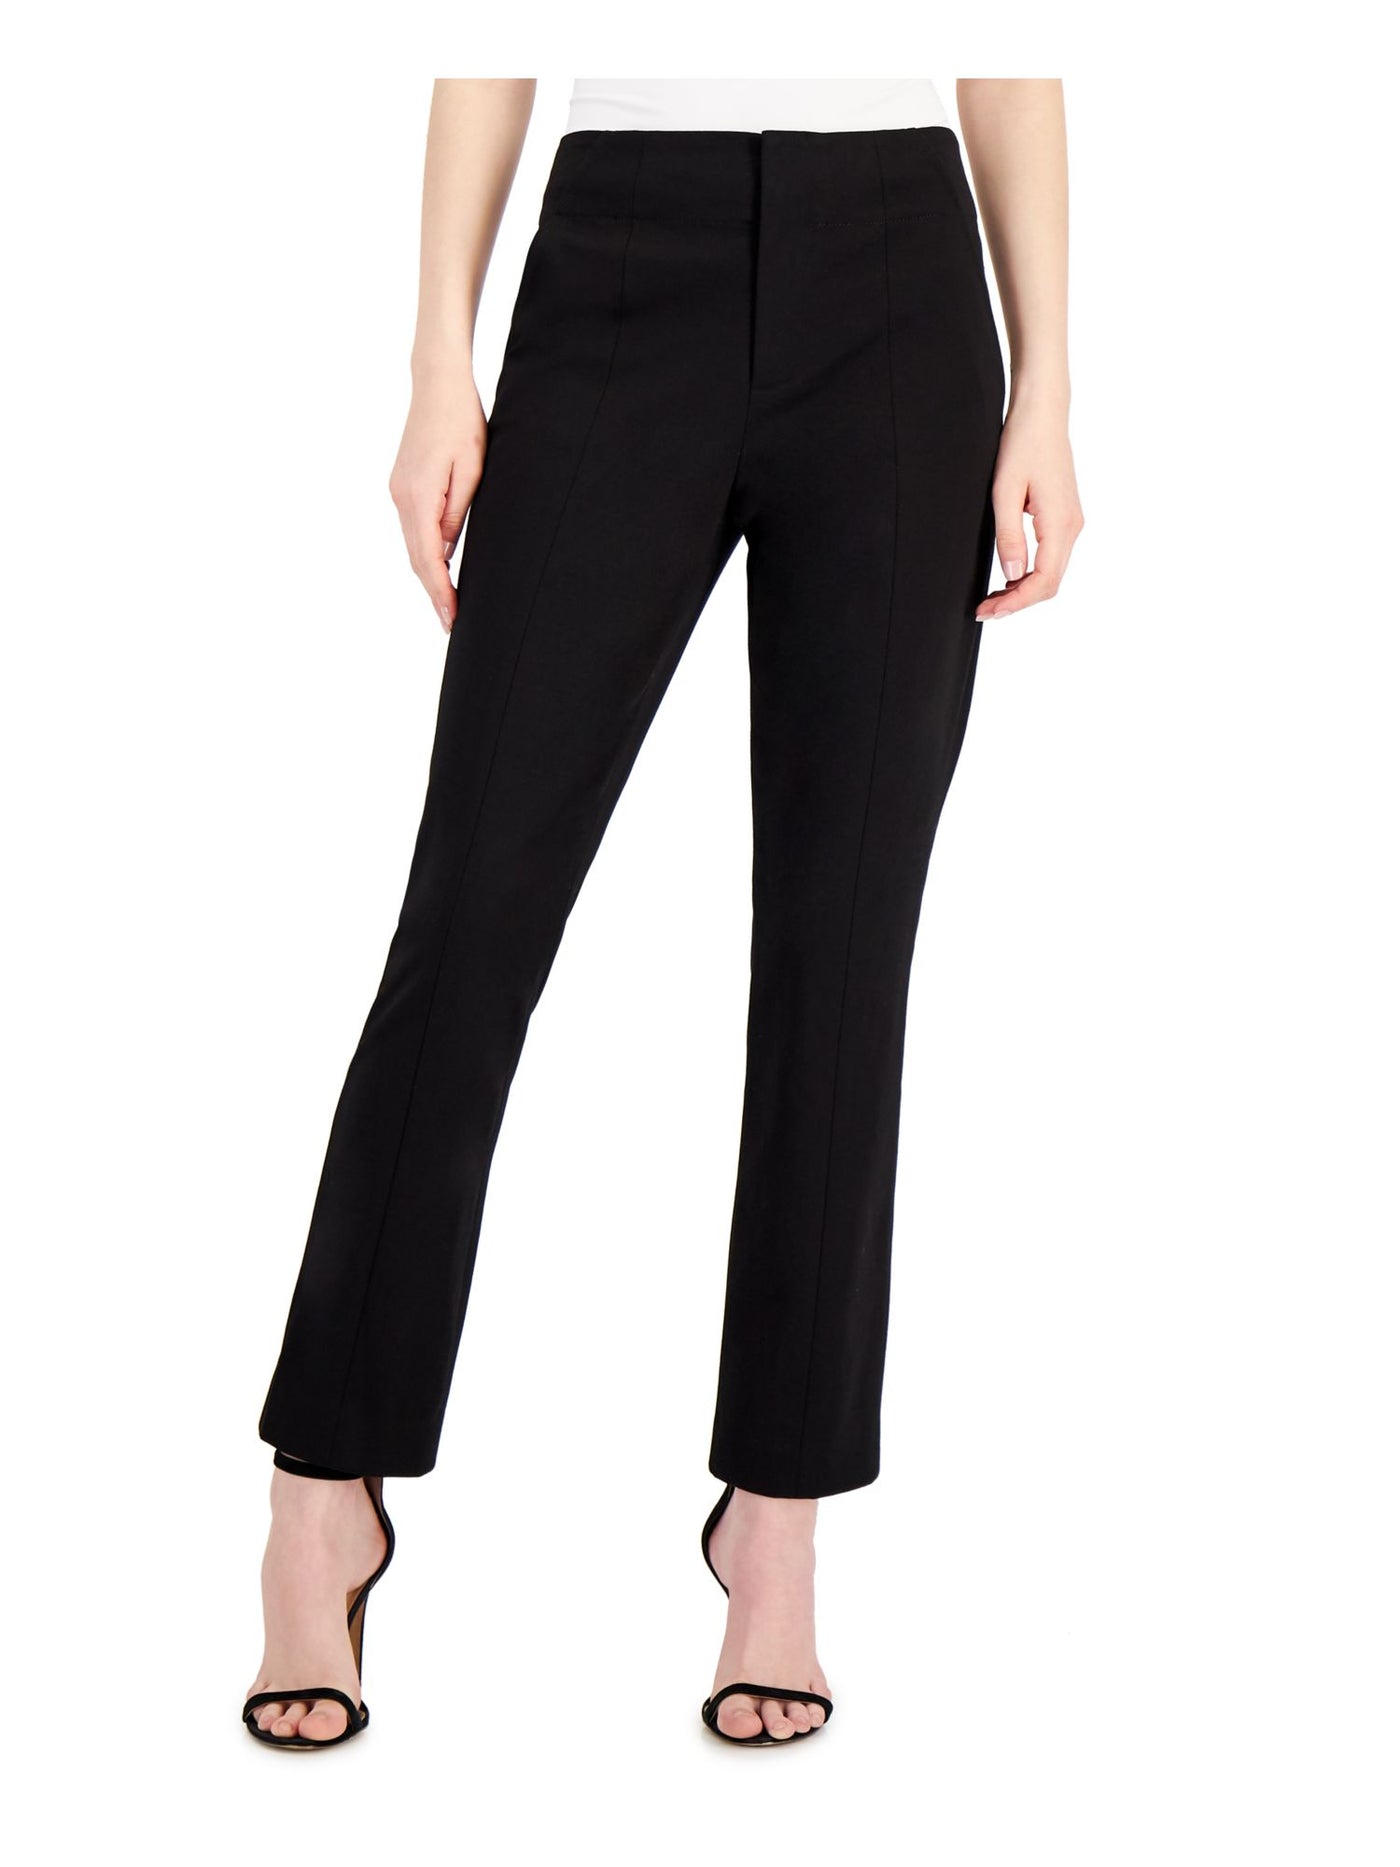 DONNA KARAN NEW YORK Womens Black Zippered Pocketed Slim Fit Ankle Wear To Work High Waist Pants 12